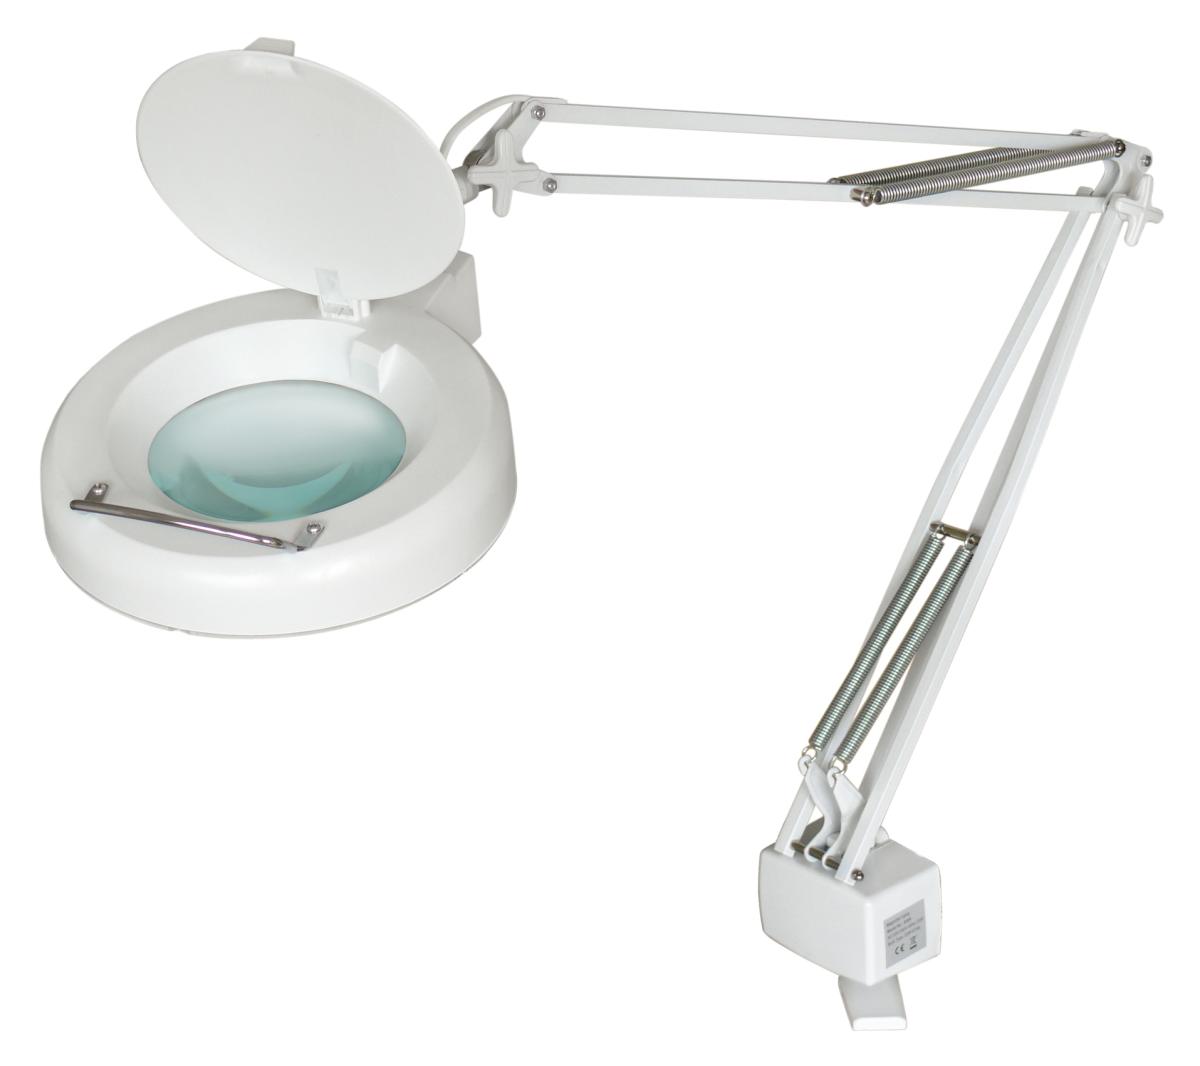 Lampe-loupe d'atelier 5 dioptries 22w blanche